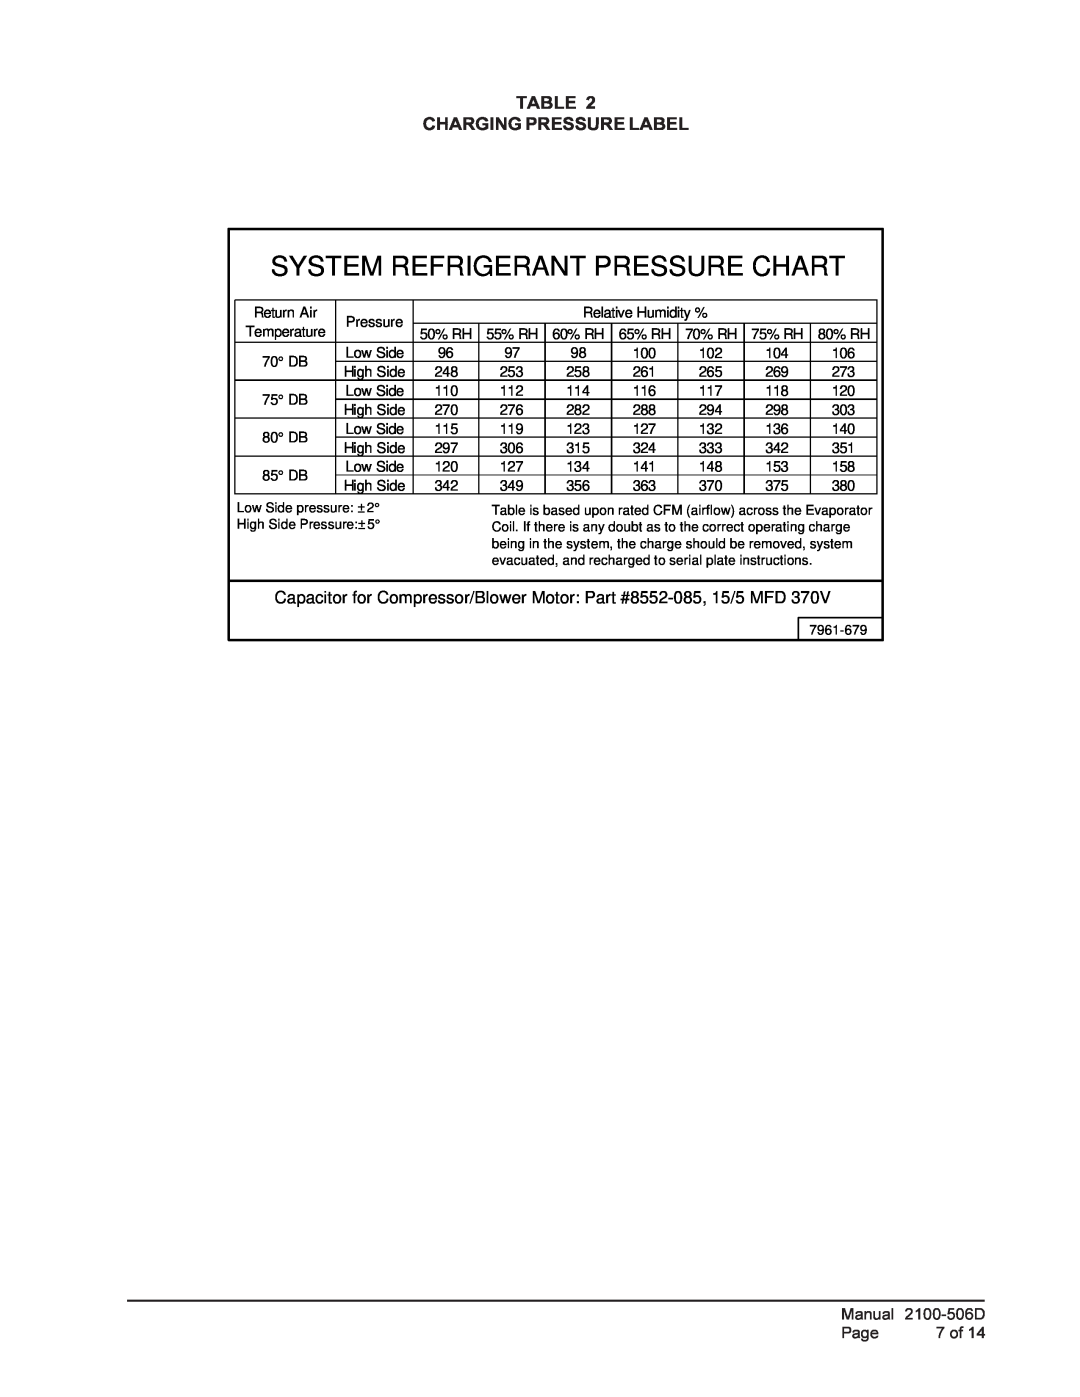 Bard CH5S1, CH4S1, CH3S1 installation instructions System Refrigerant Pressure Chart, Table Charging Pressure Label 